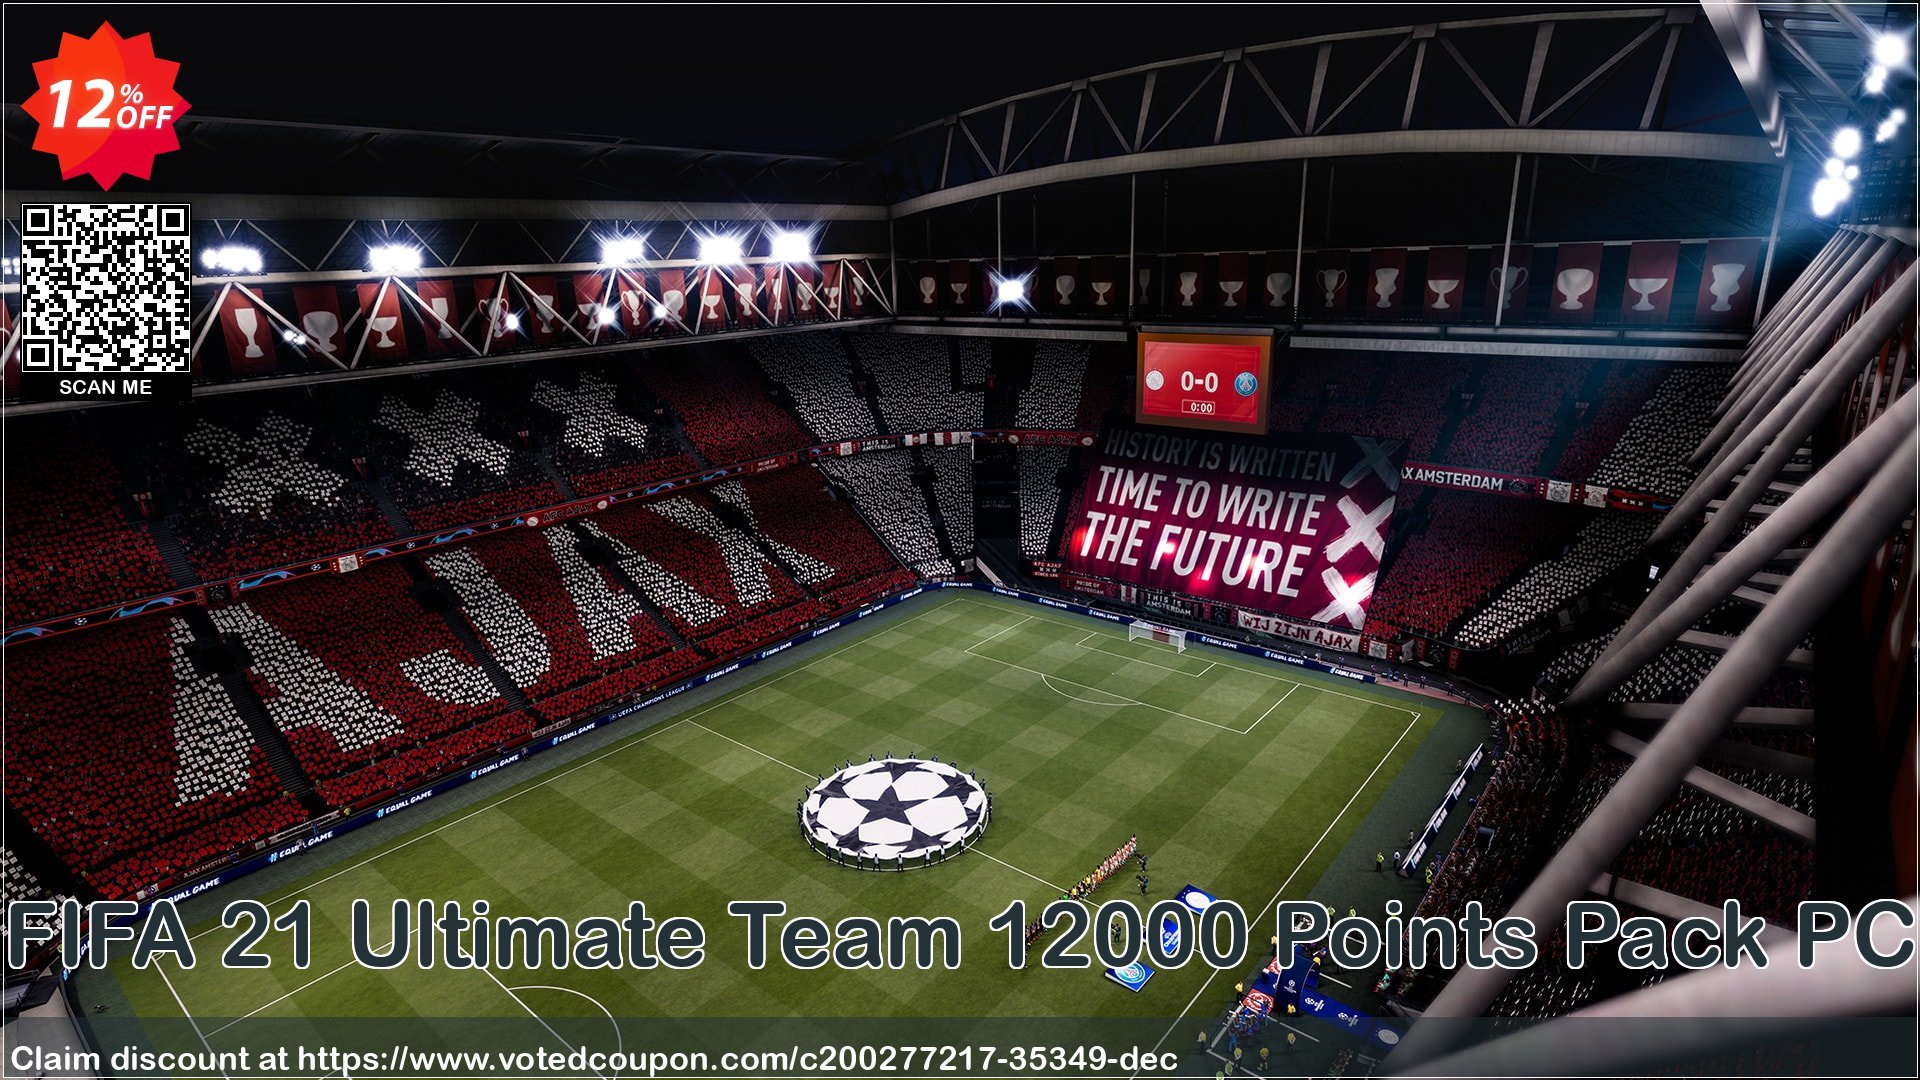 FIFA 21 Ultimate Team 12000 Points Pack PC Coupon Code Apr 2024, 12% OFF - VotedCoupon